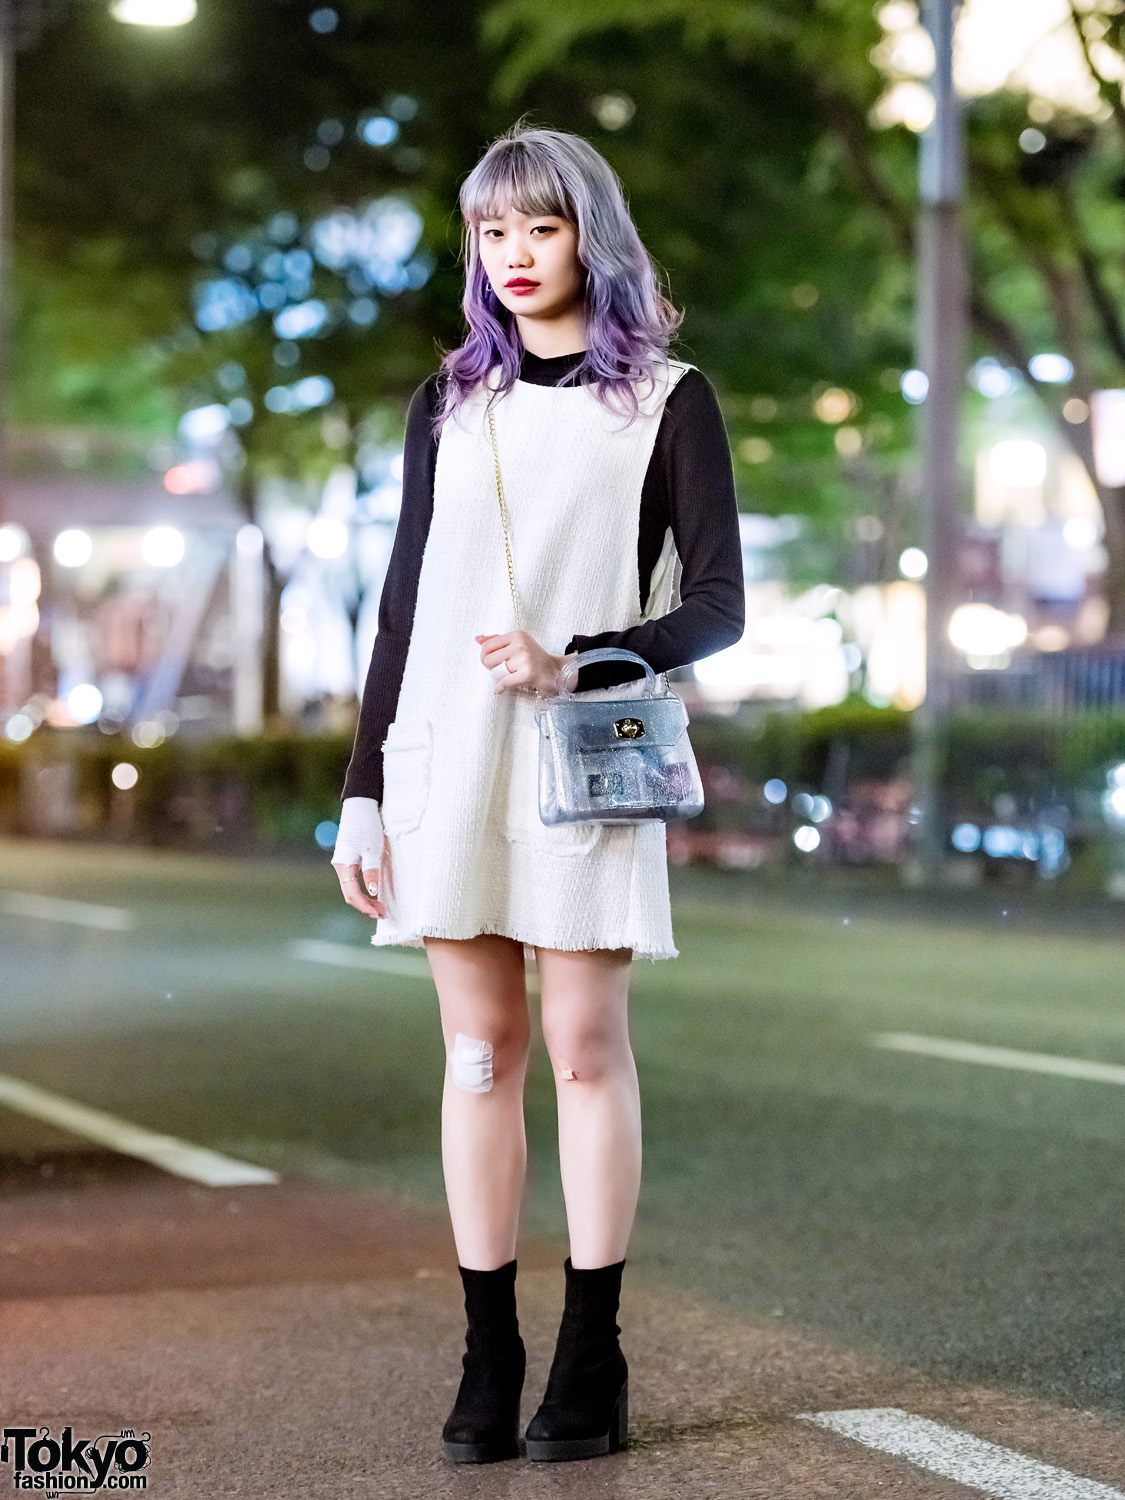 Ombre-Haired Elleanor in Harajuku w/ Zara Tunic Dress, Suede Boots & WC Glitter Bag